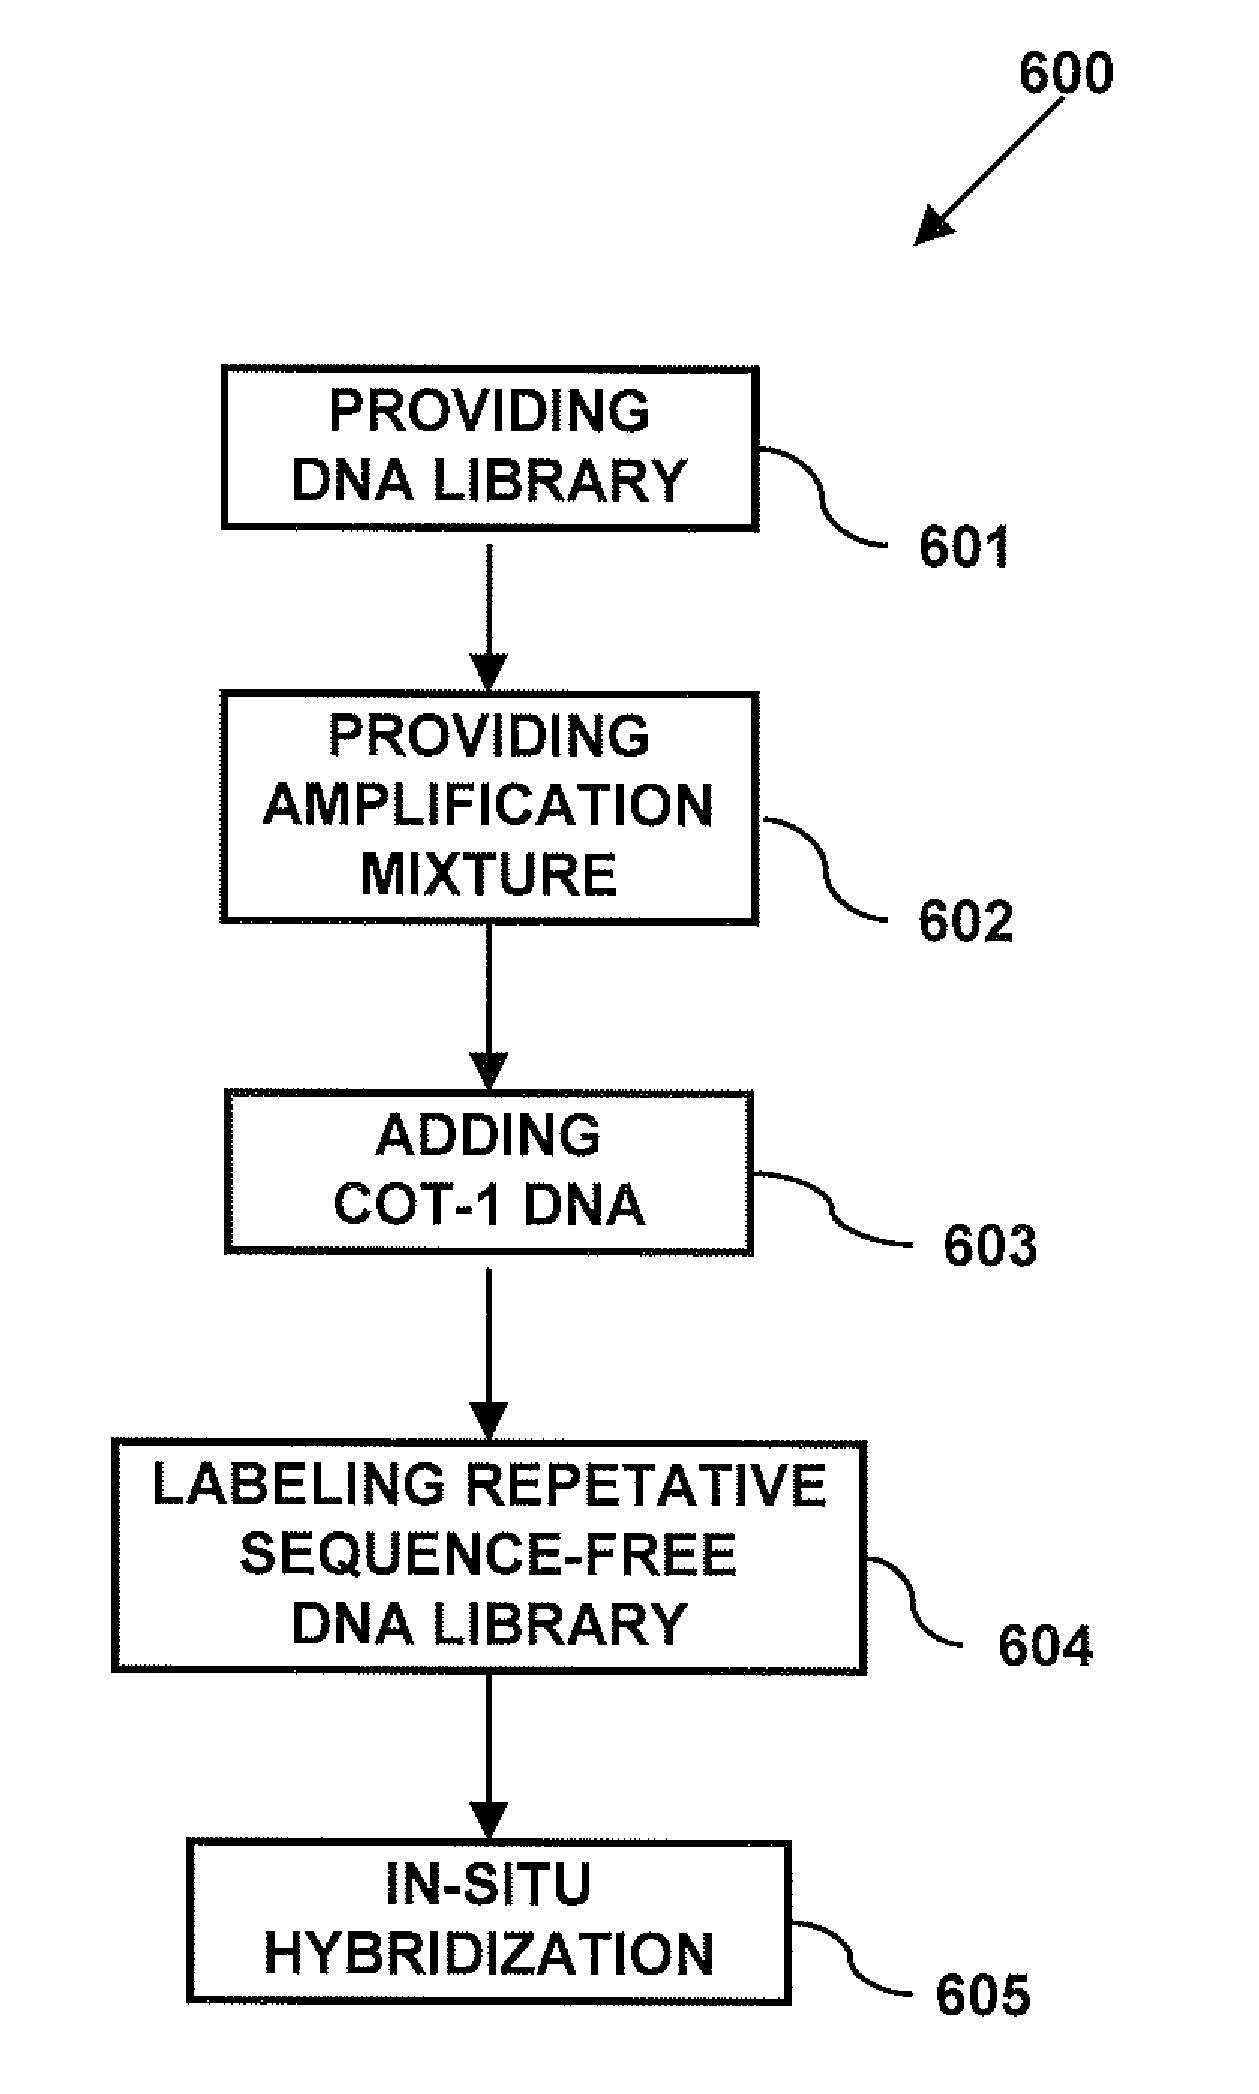 Repetitive Sequence-Free DNA Libraries